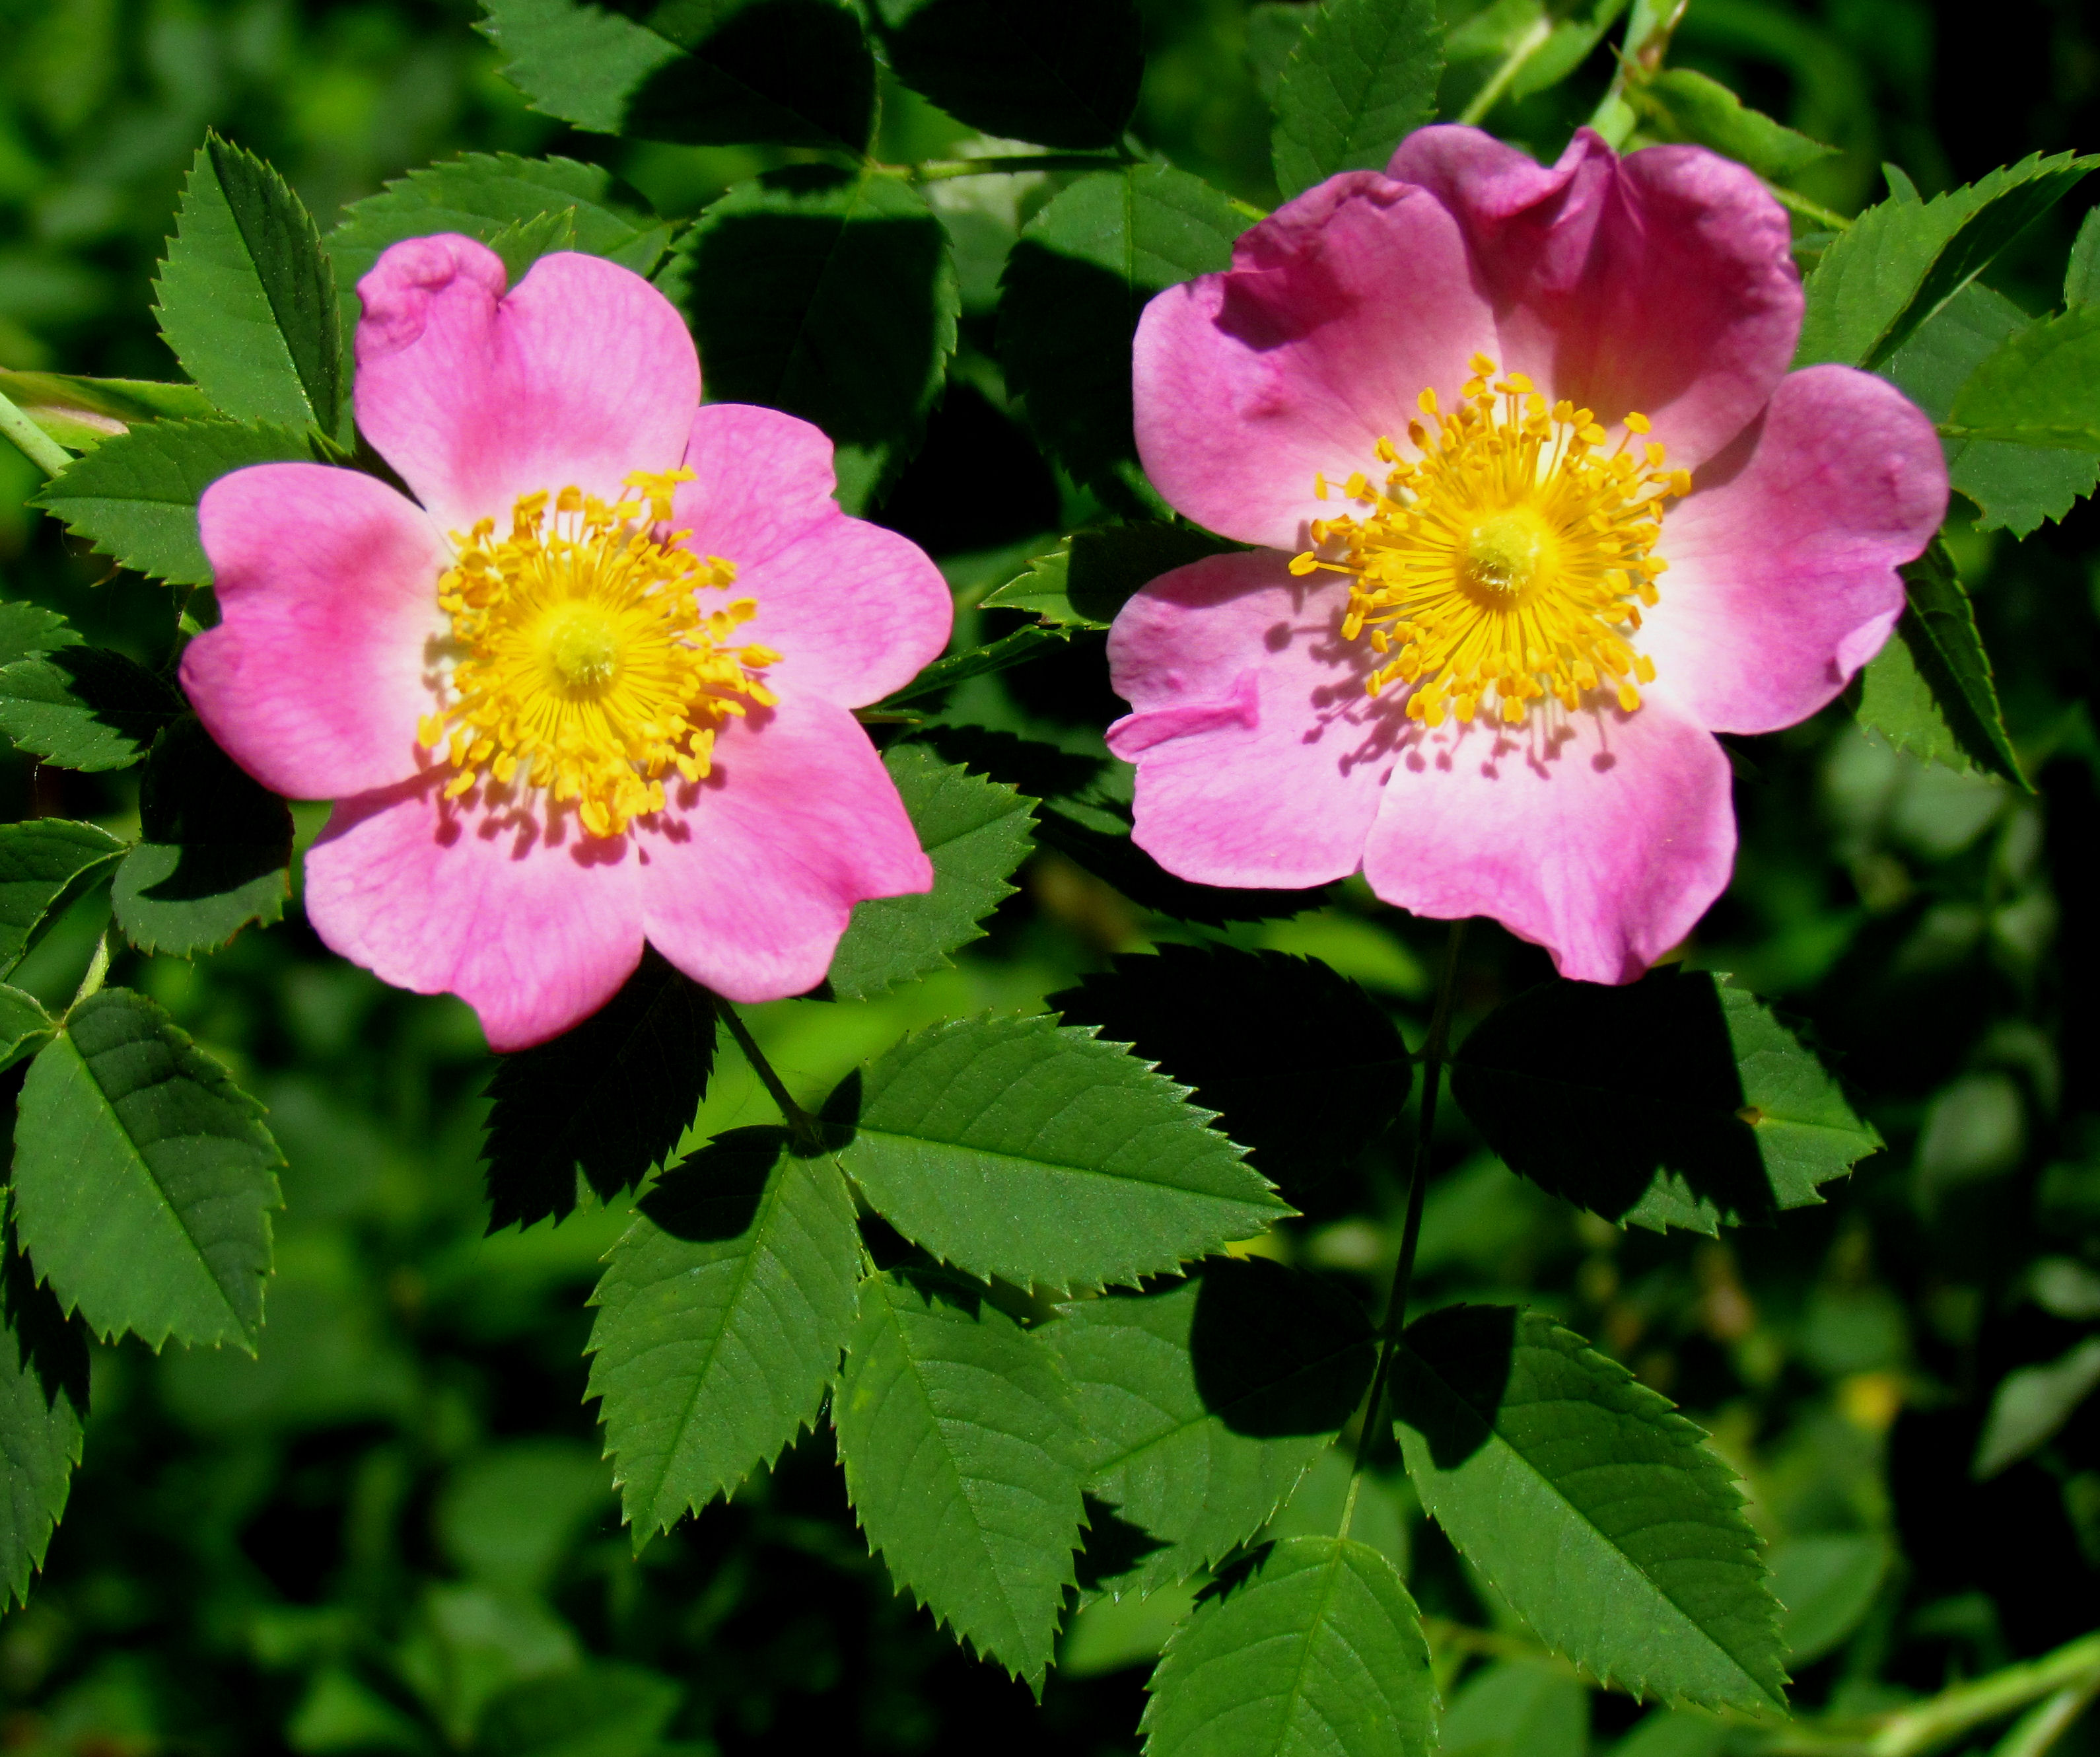 File:Pasture Rose, flowers and leaves.jpg - Wikimedia Commons